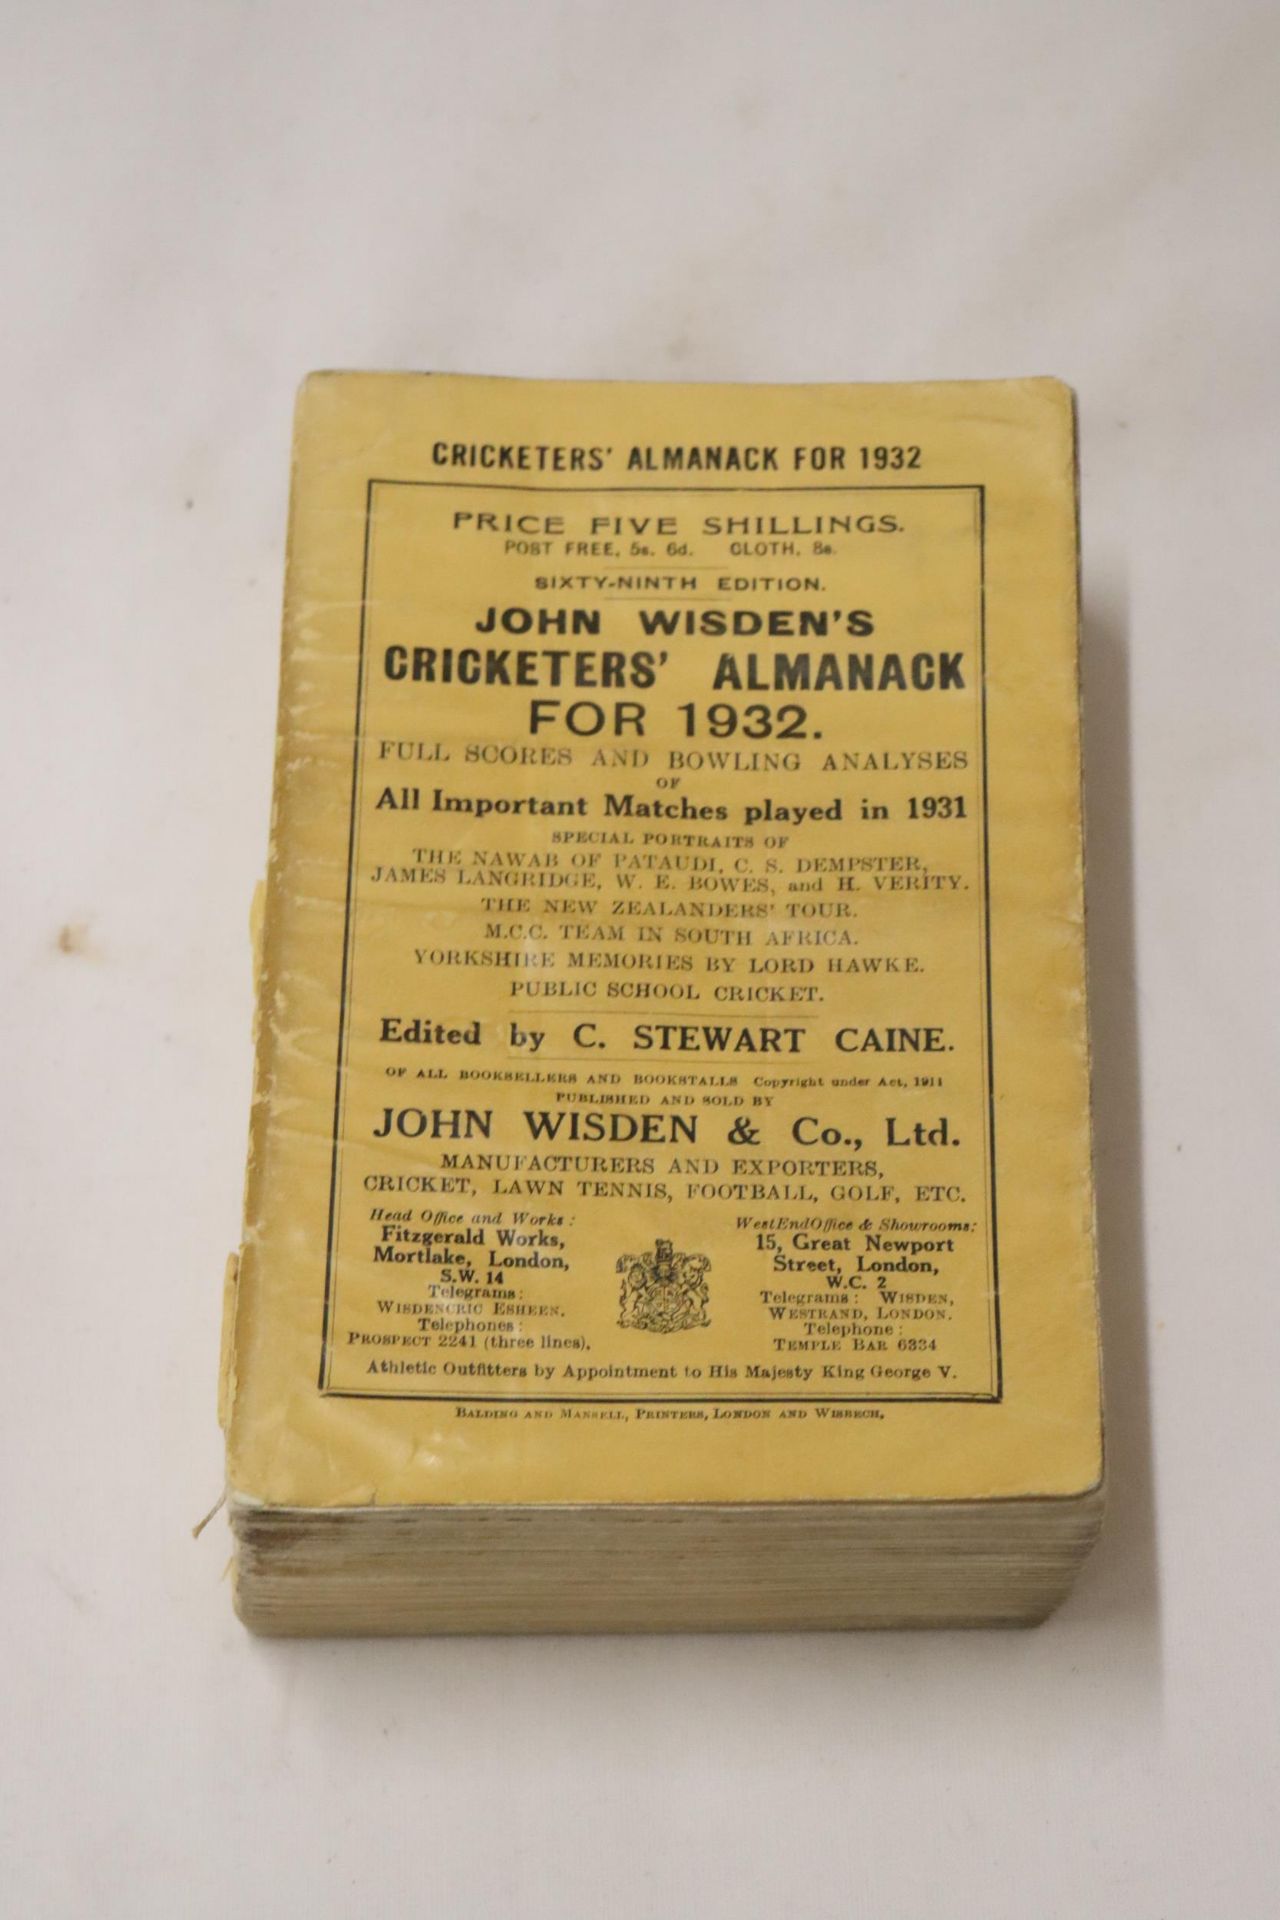 A 1932 COPY OF WISDEN'S CRICKETER'S ALMANACK. THIS COPY IS IN USED CONDITION, MISSING PART OF THE